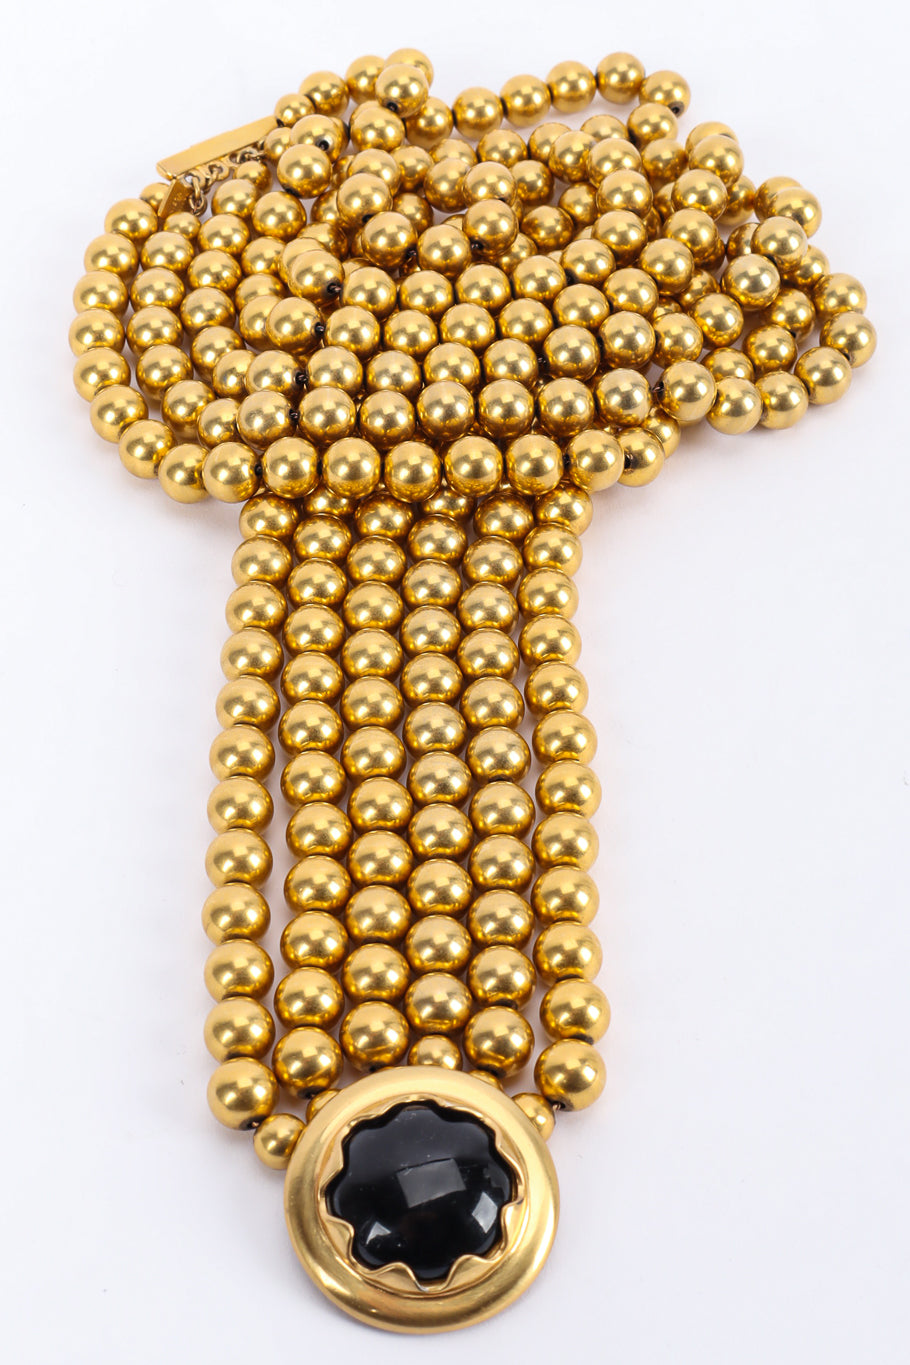 Multi-strand ball chain collar necklace by Anne Klein product shot on flat lay photo details.. @recessla